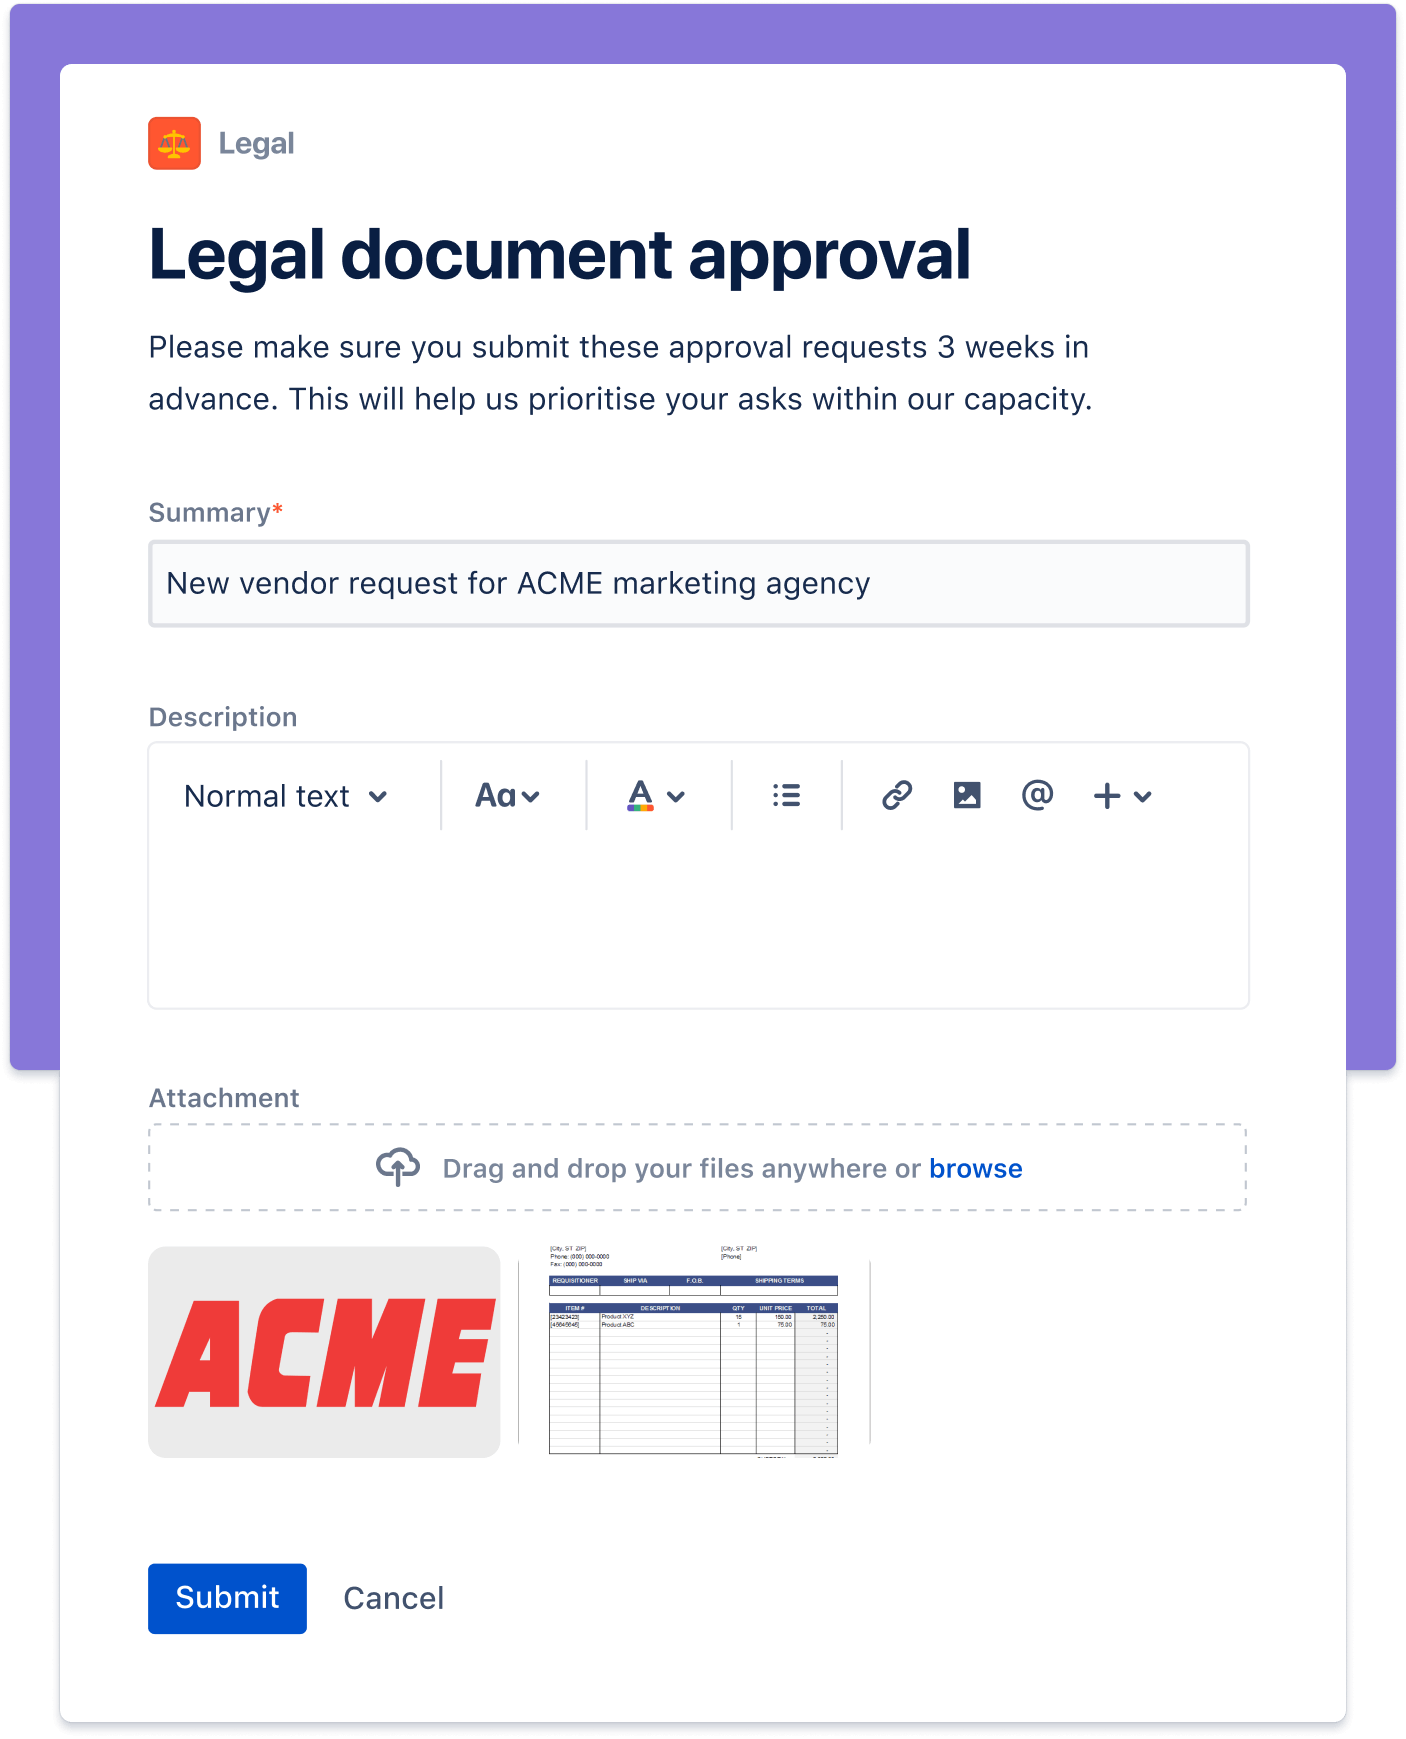 Legal document approval screenshot